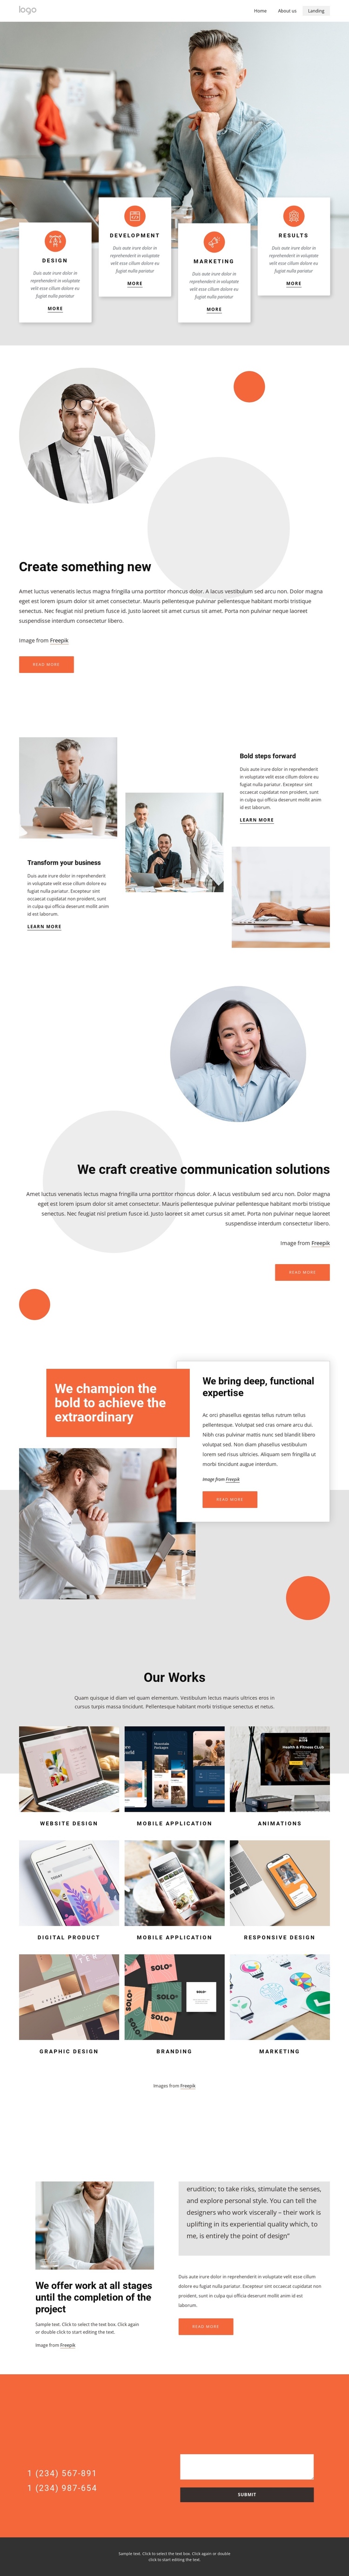 Crafting digital experiences: One Page Template